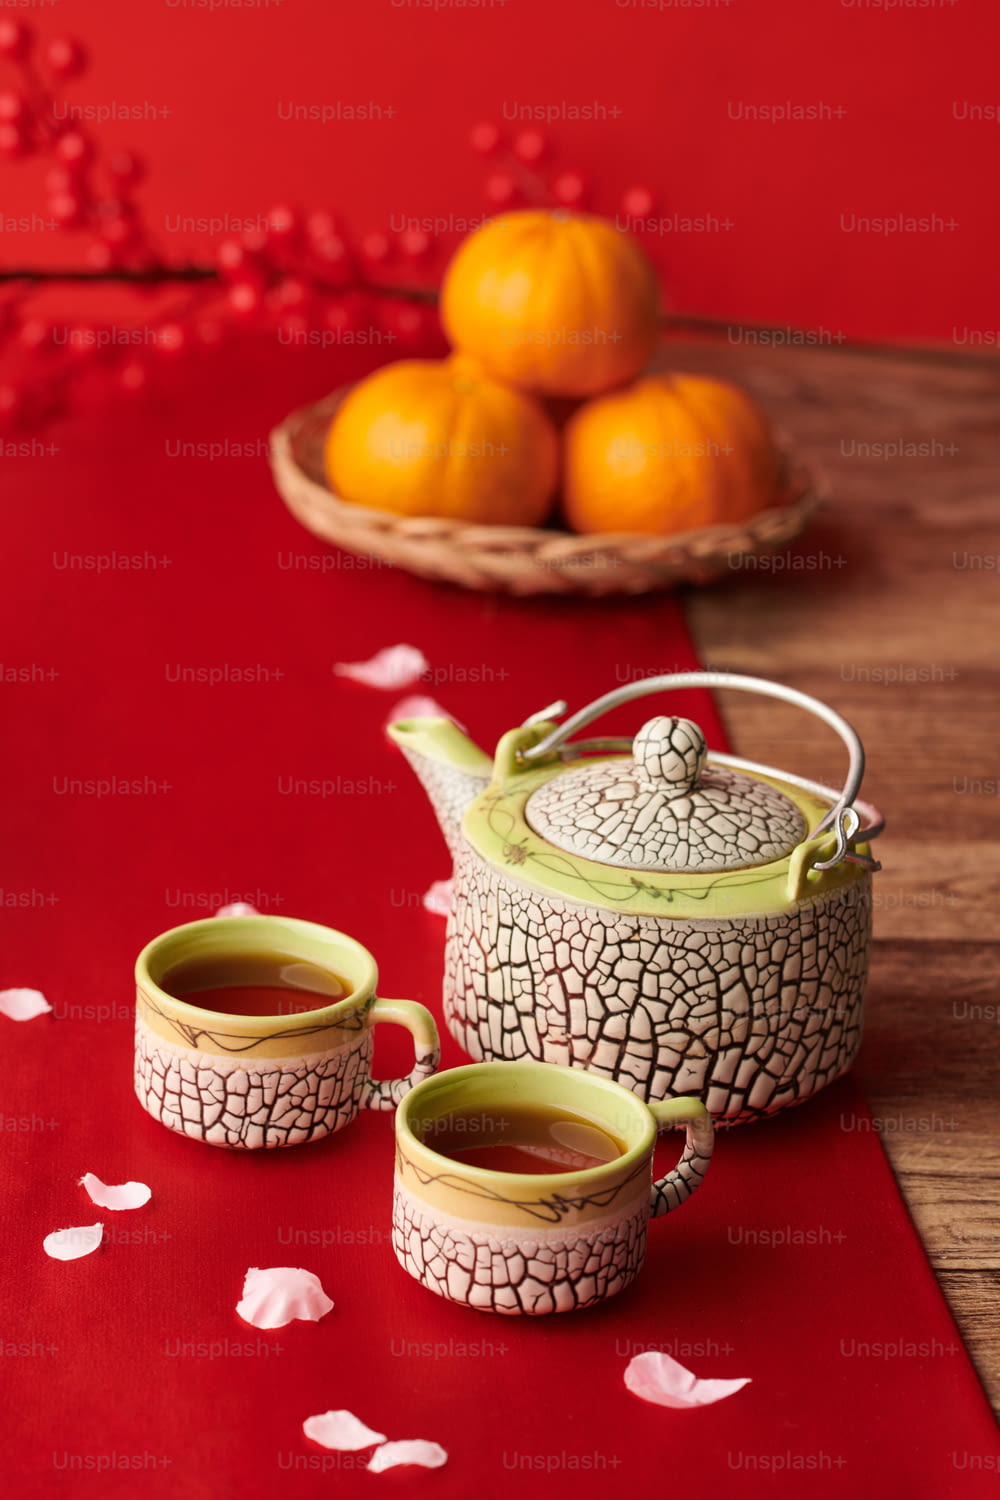 Pot and two cups of tea on table covered with red cloth traditional for Lunar New Year celebration